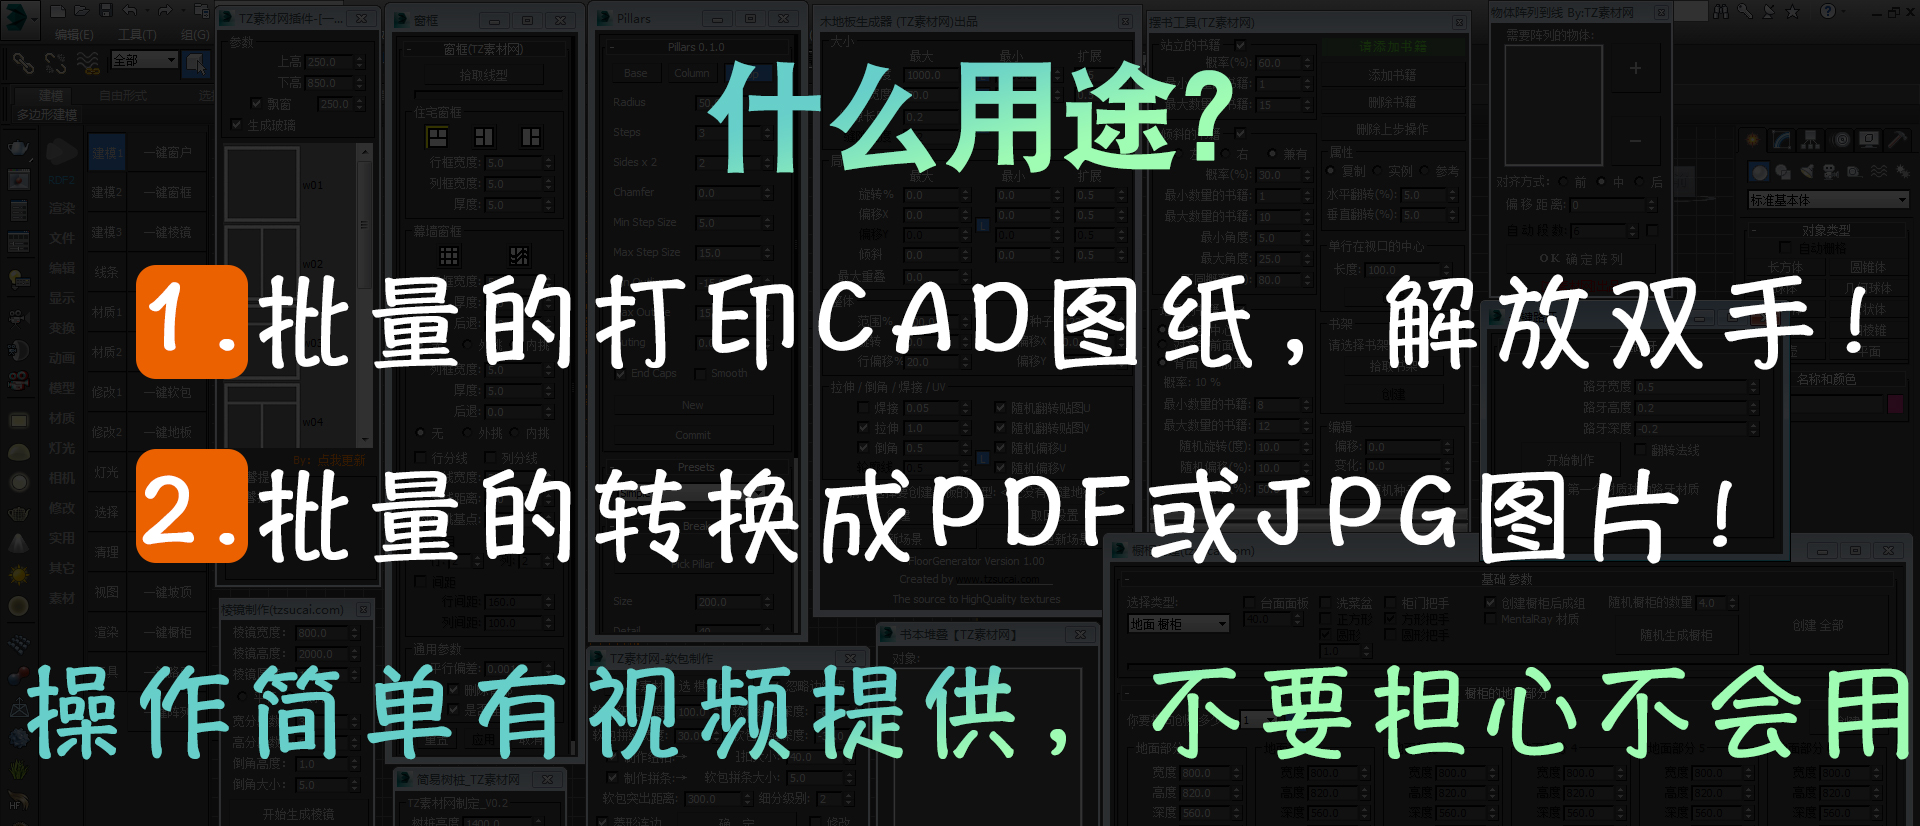 cad-batch-printing-software-batch-converts-into-pdf-format-files-inews